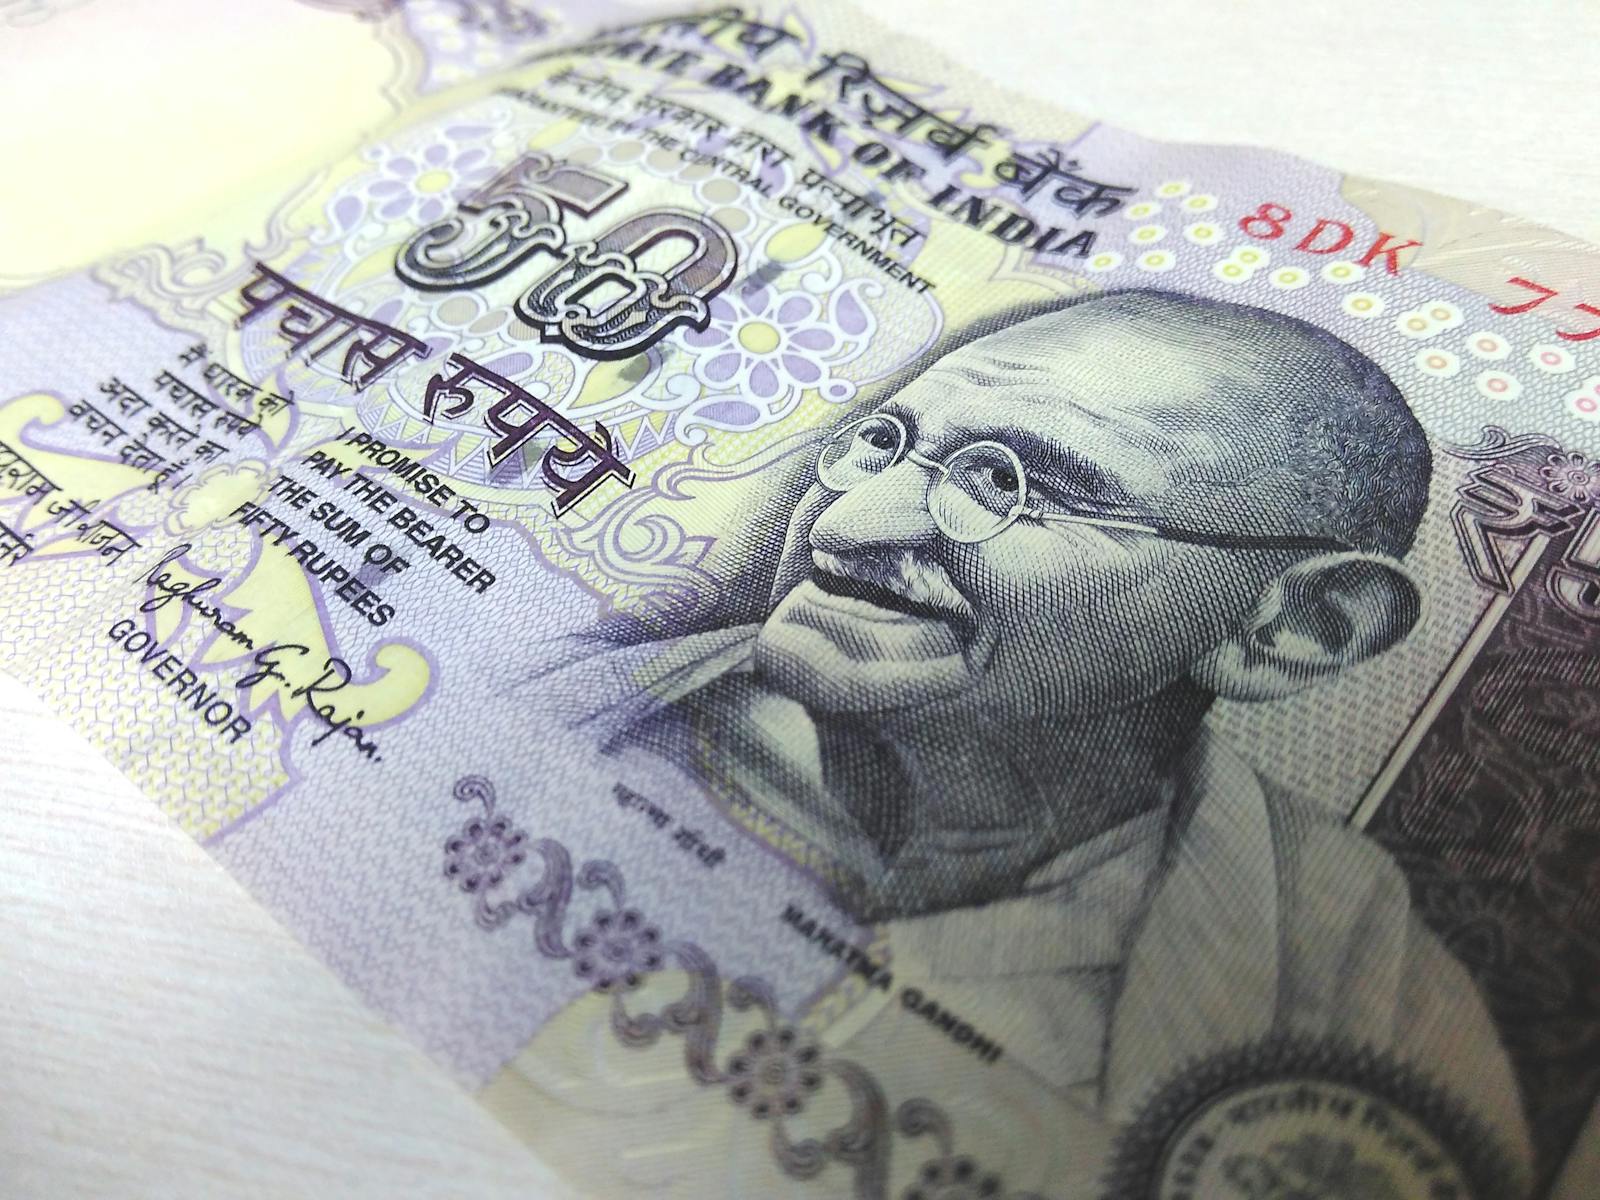 Rs 50 Photo by Sohel Patel from Pexels: https://www.pexels.com/photo/50-indian-rupee-banknote-68912/